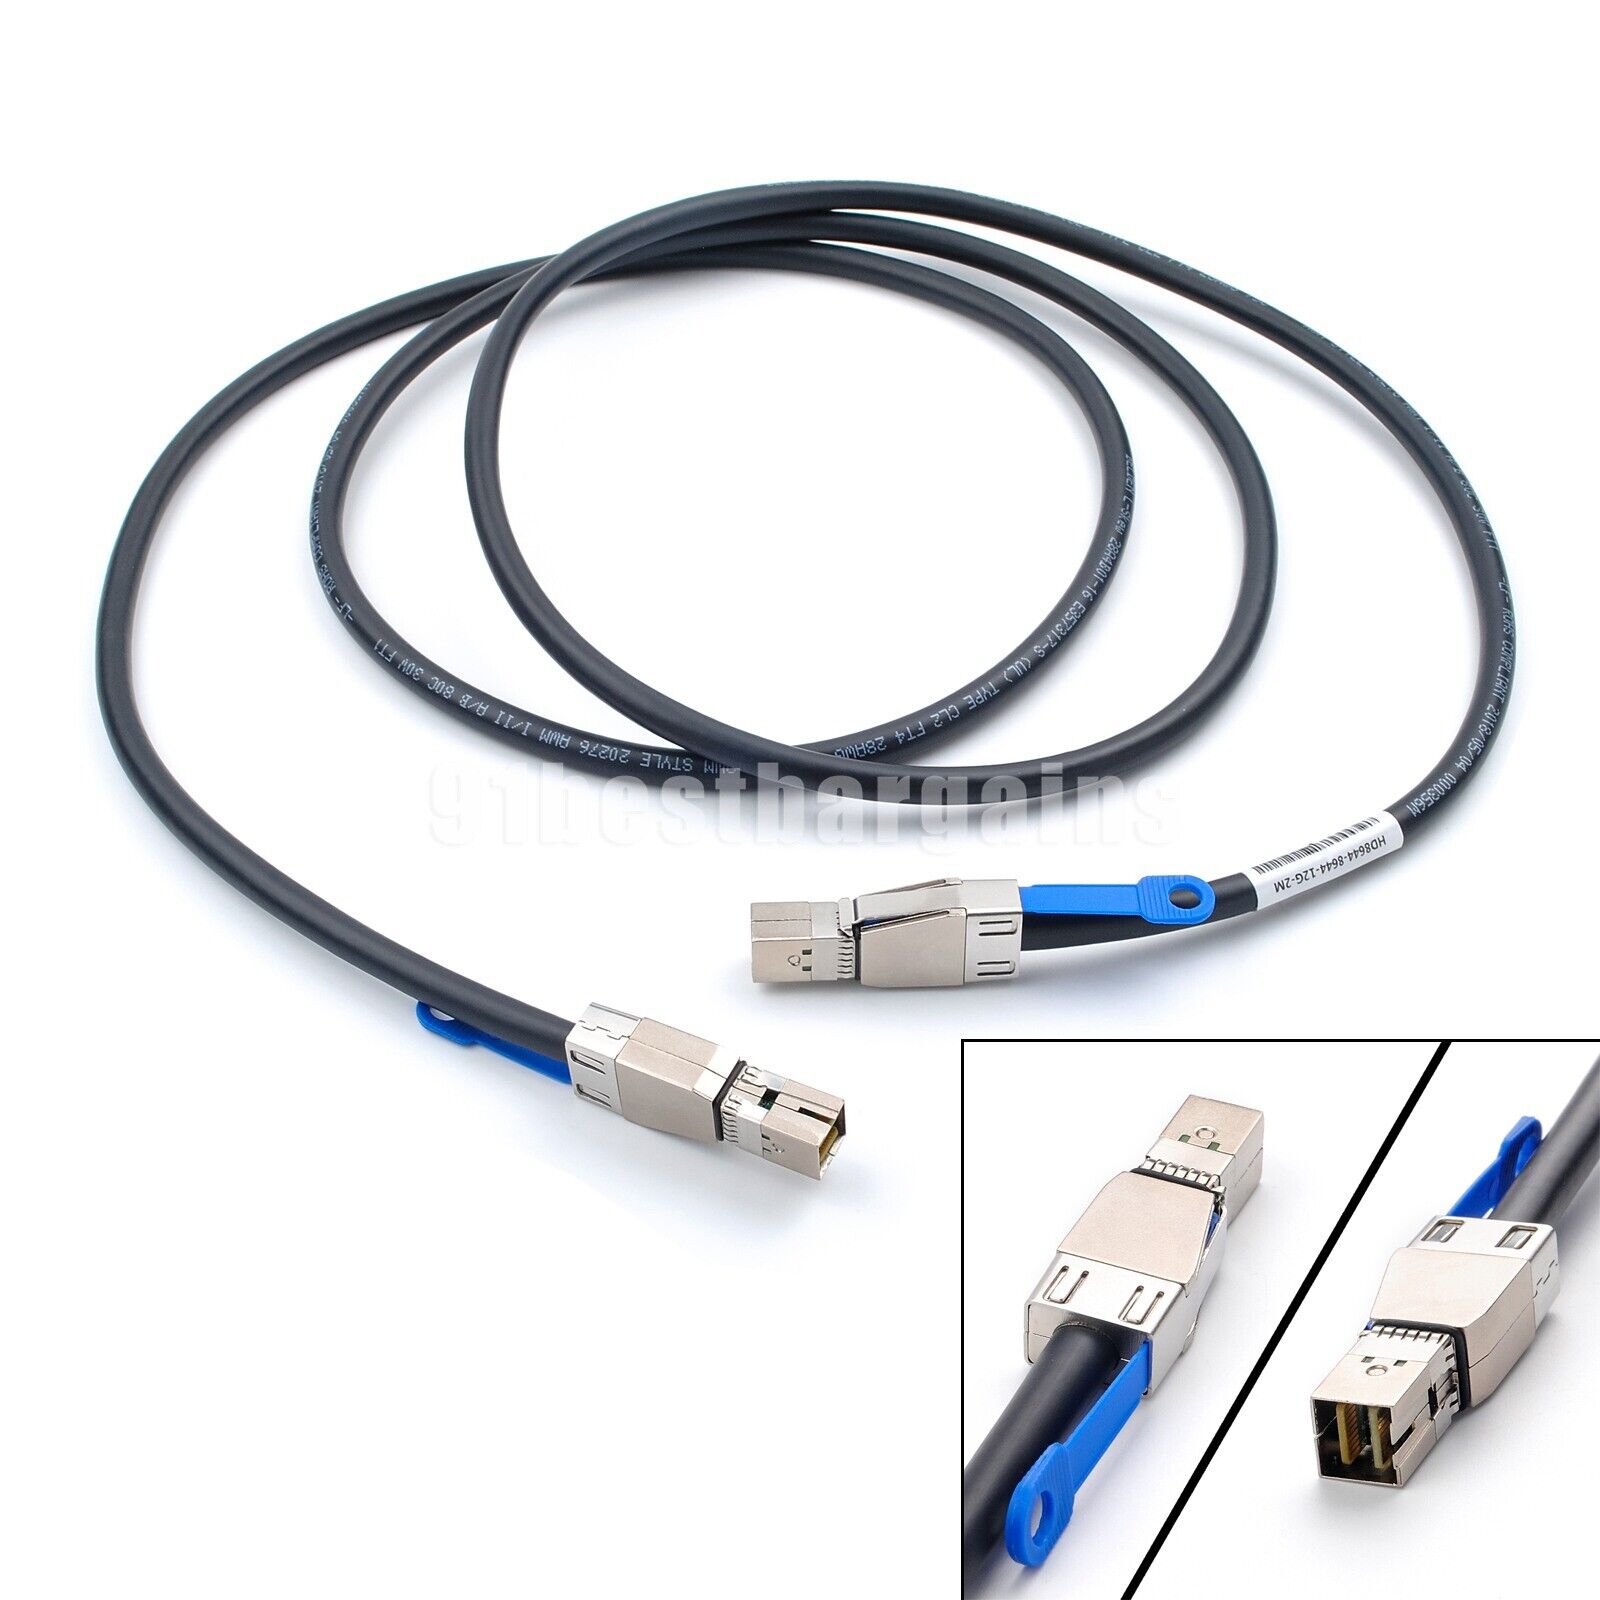 0GYK61 GYK61 For Dell 12gb 6ft SFF-8644 to SFF-8644 External HD Mini SAS Cable